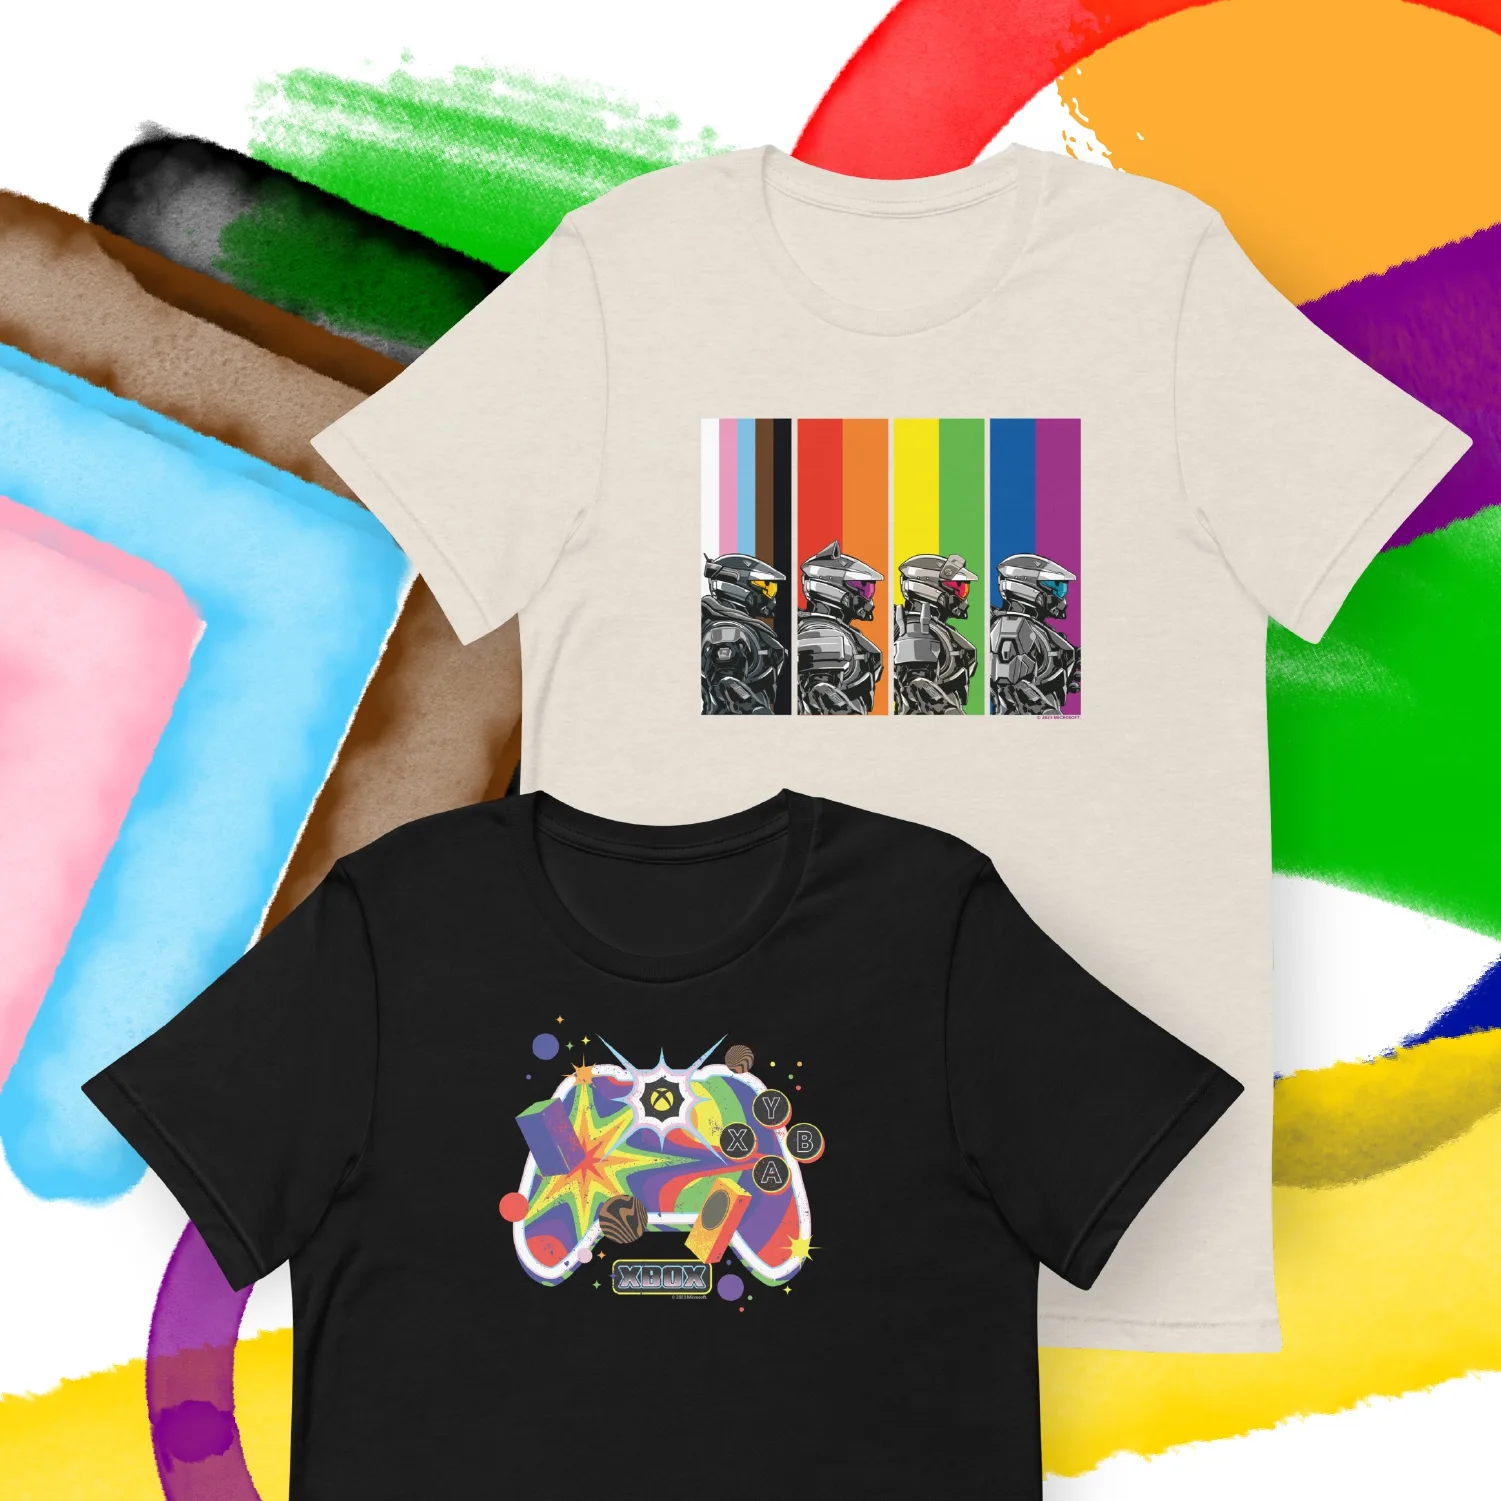 Two t - shirts with colorful designs on them.